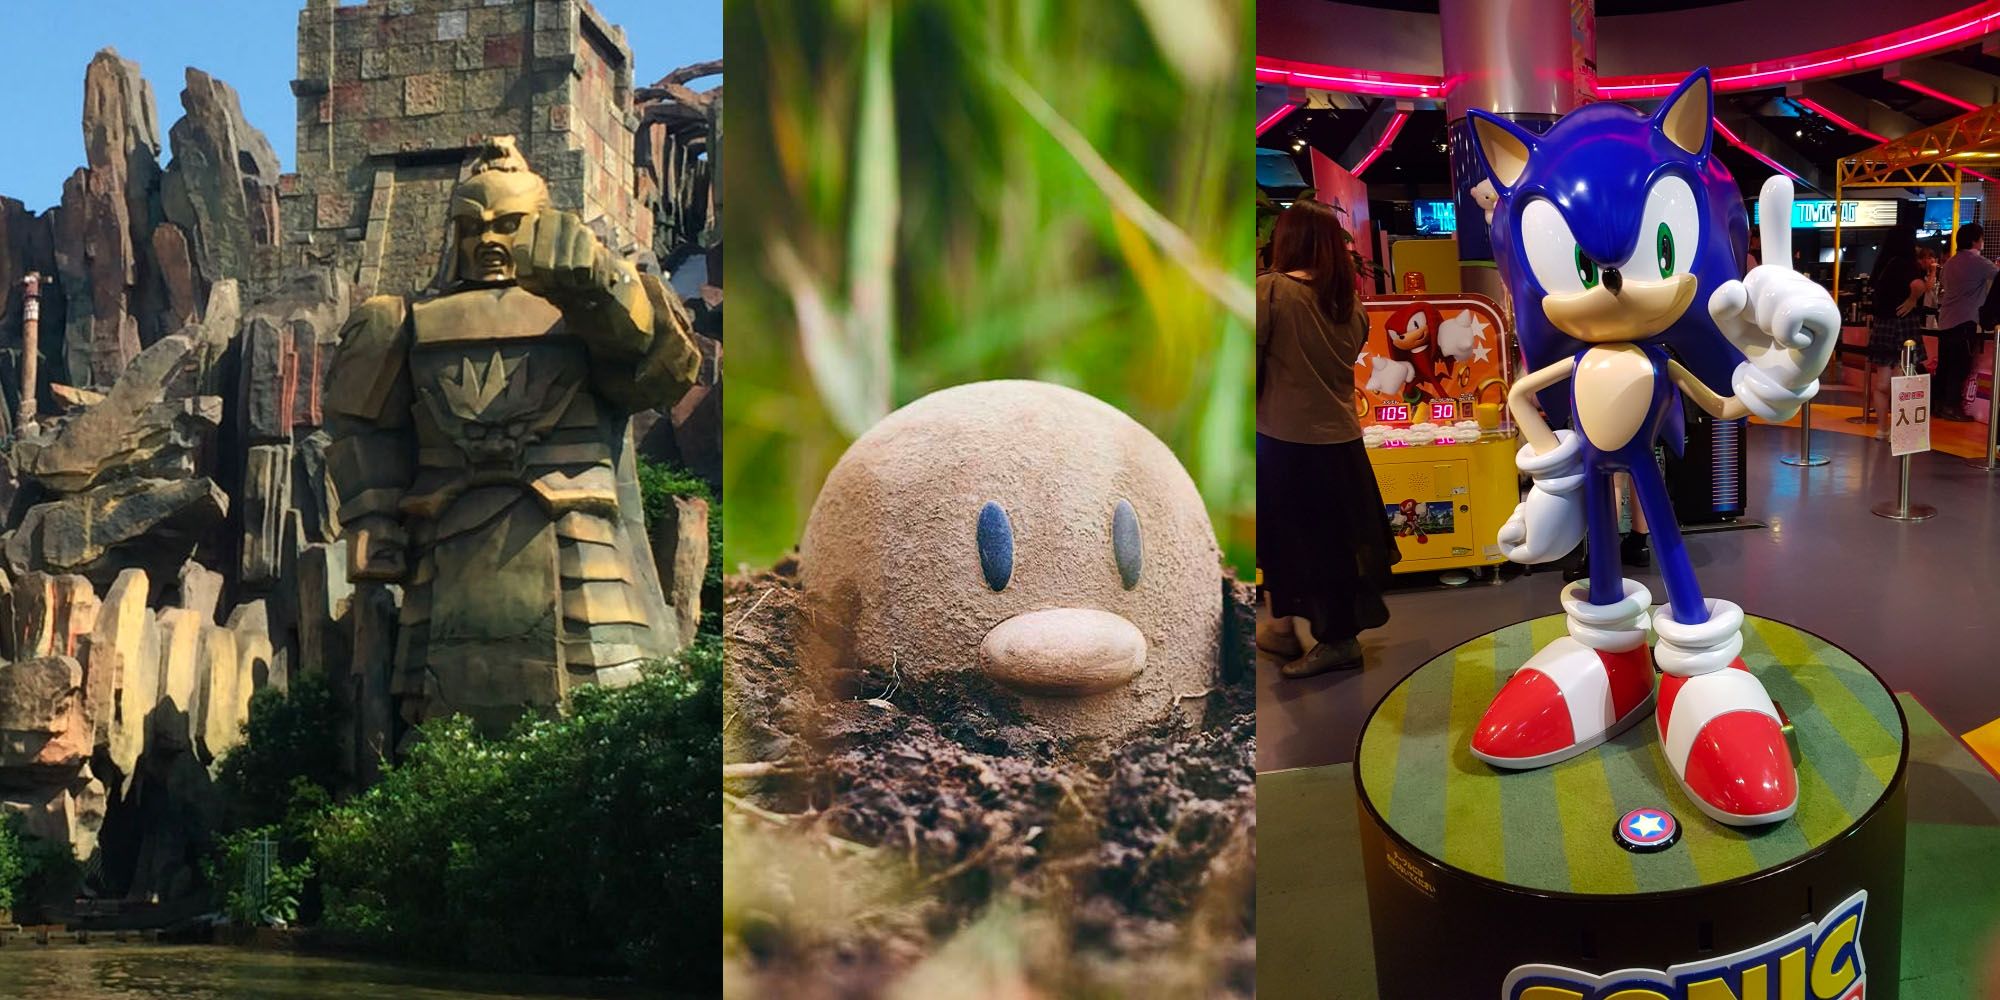 Theme Parks Based on Video Games